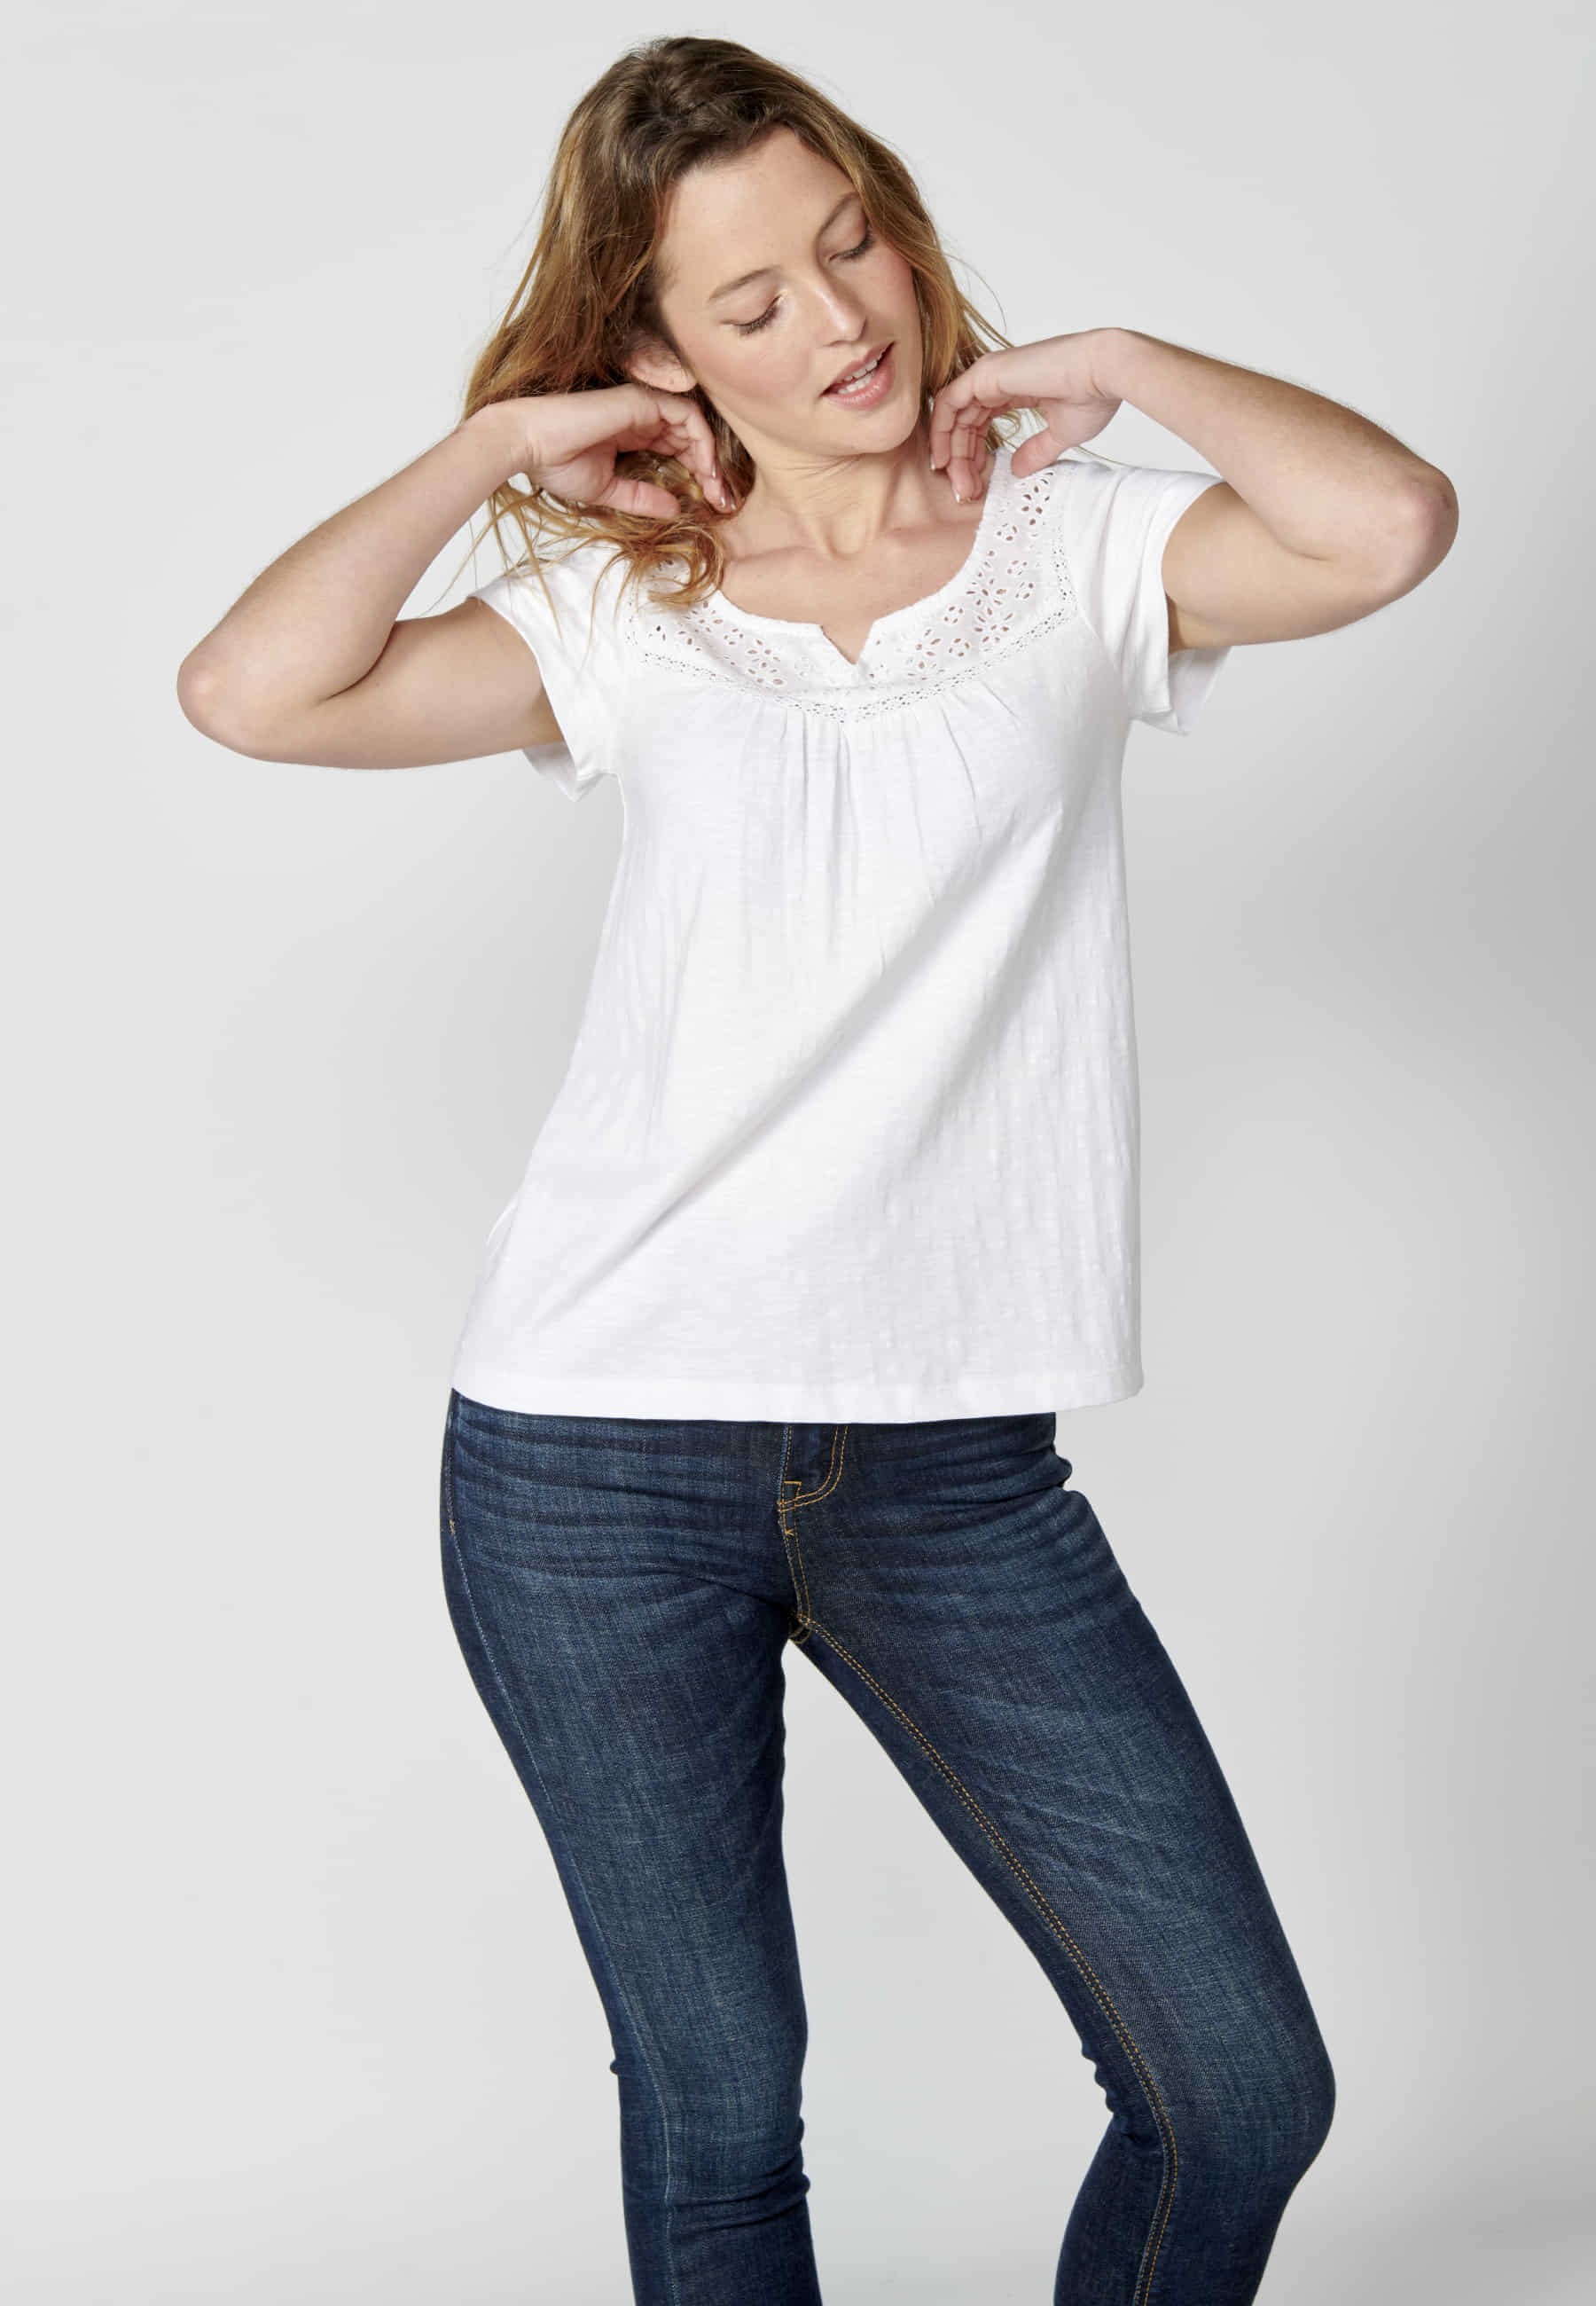 White short-sleeved Cotton T-shirt with sweetheart neckline for Woman